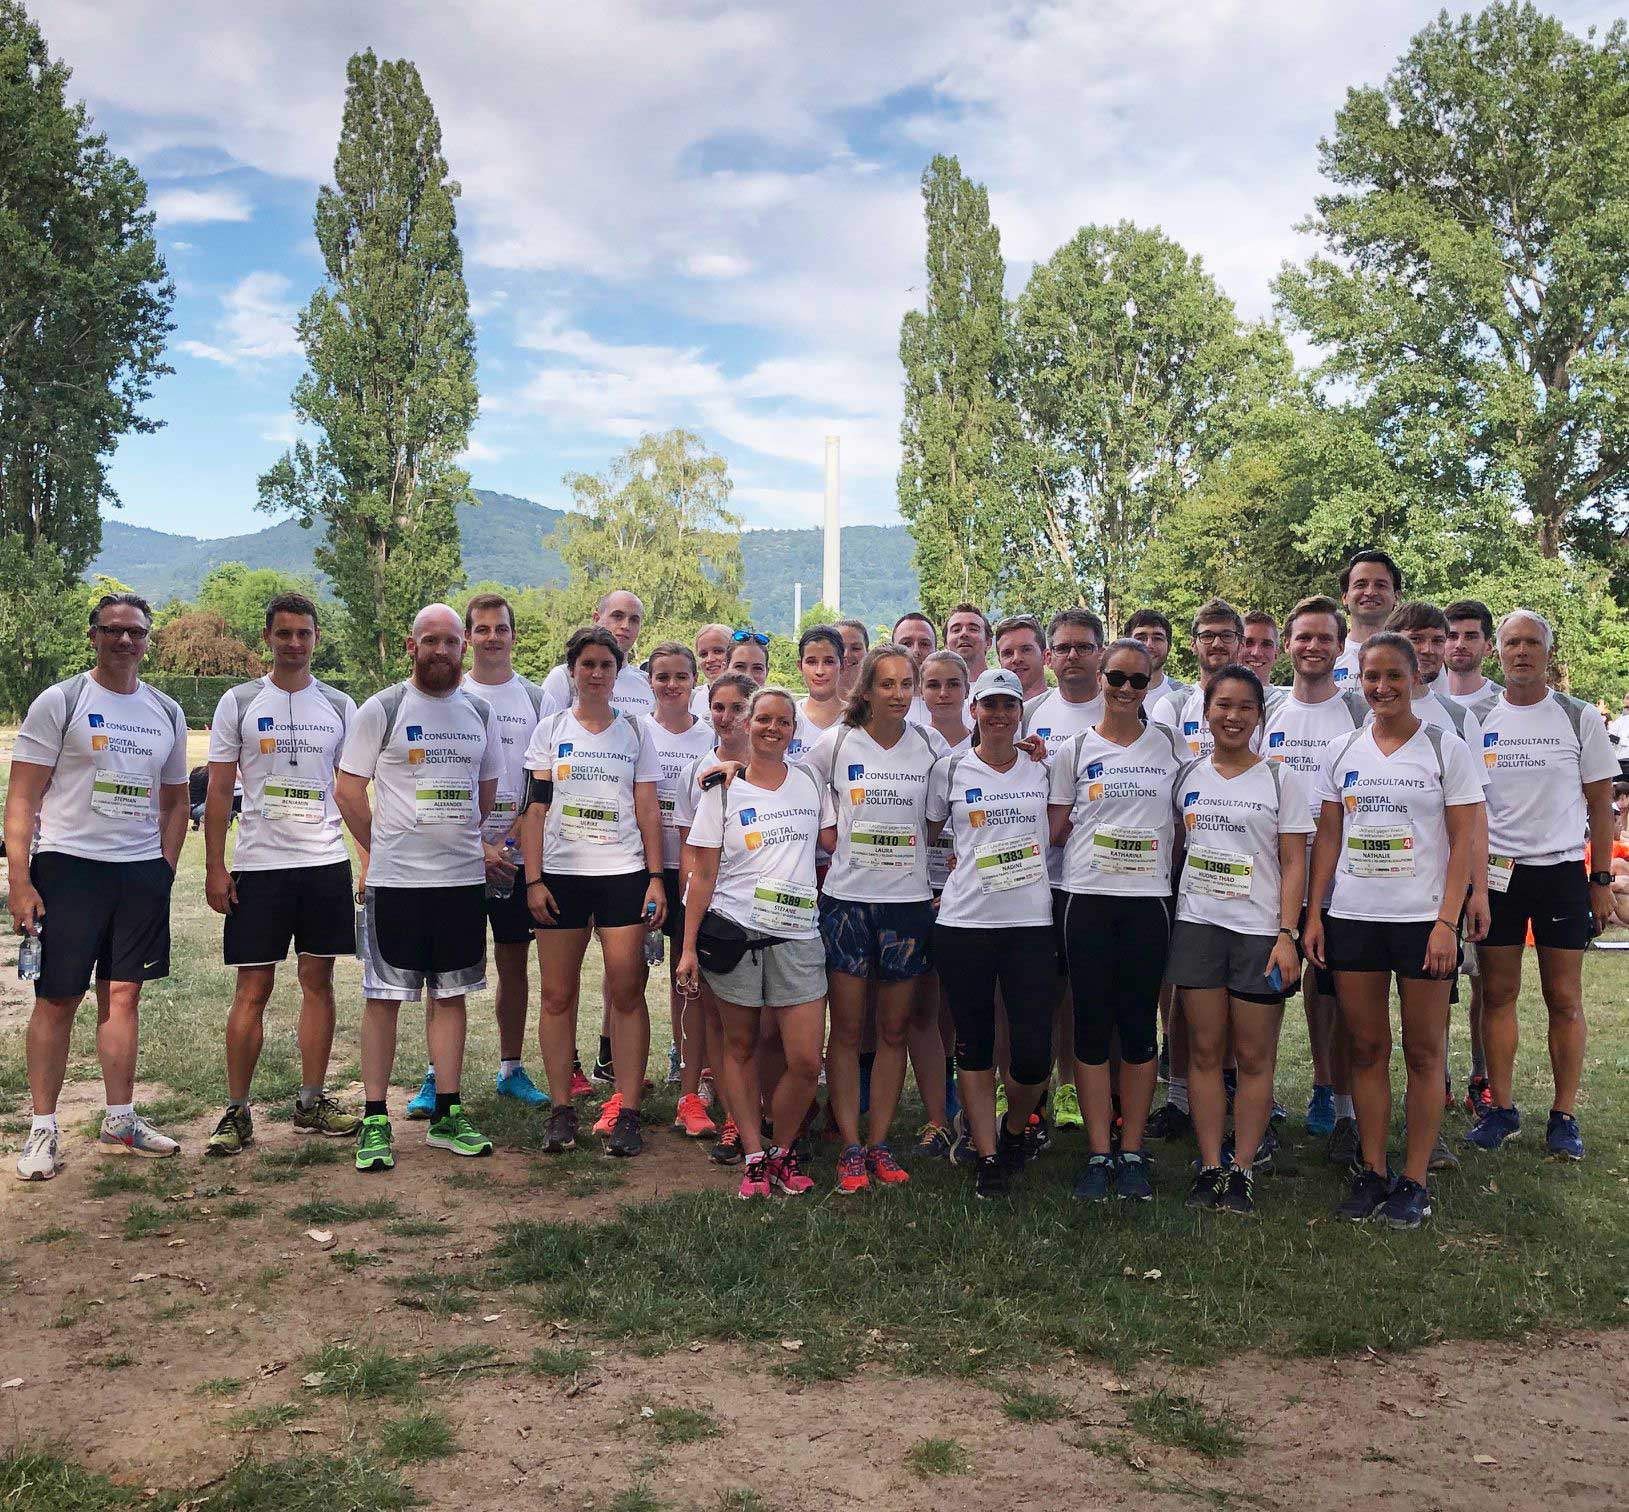 Teamphoto of the participants of the NCT run in the countryside